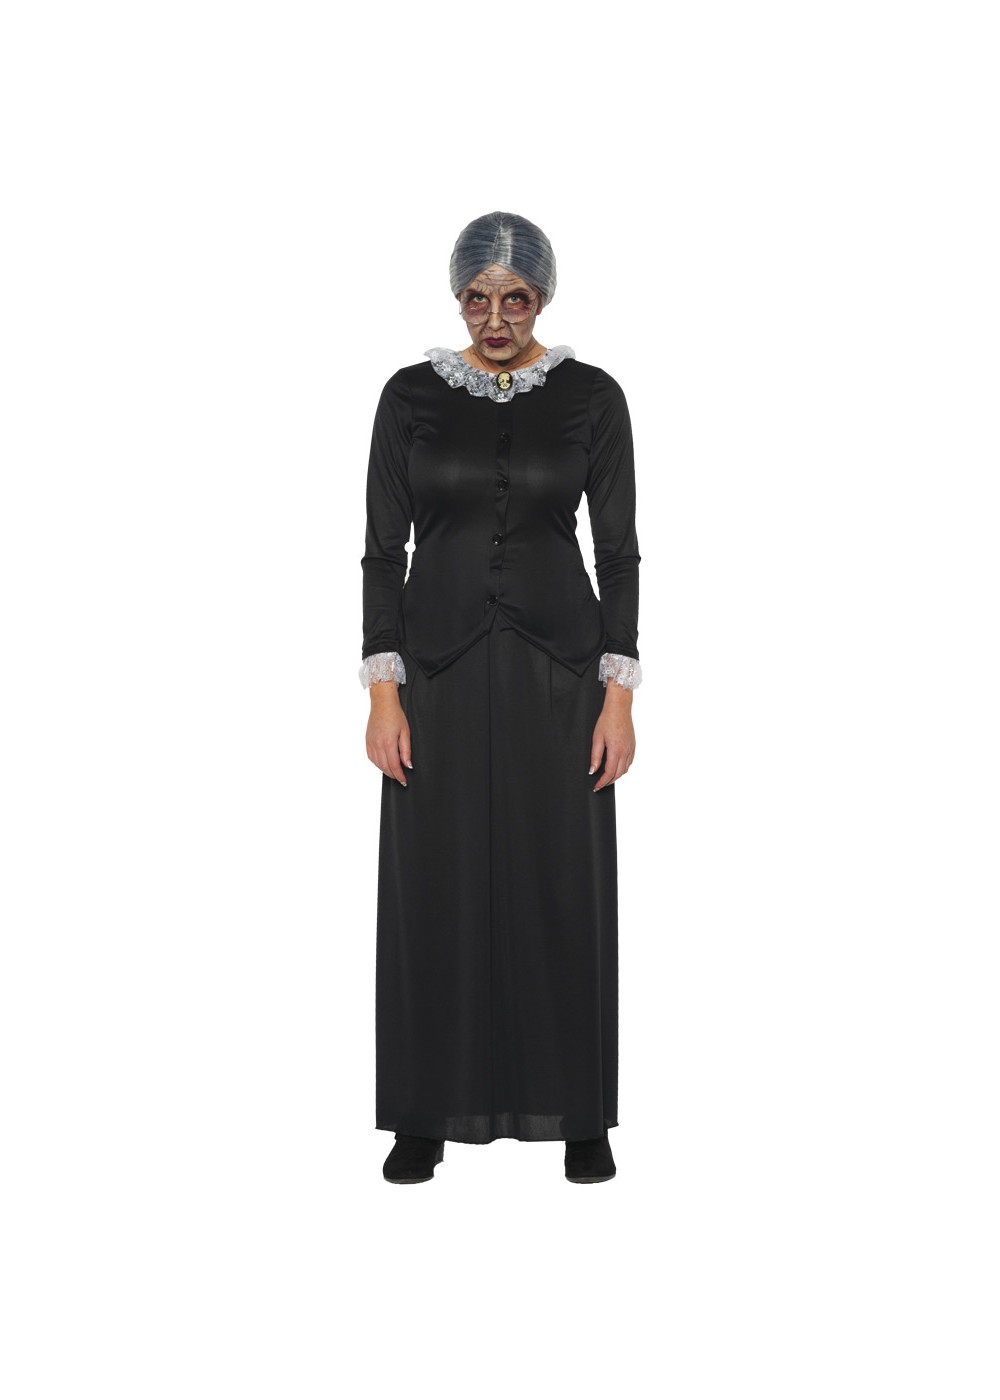 Womens Dead Mother Costume